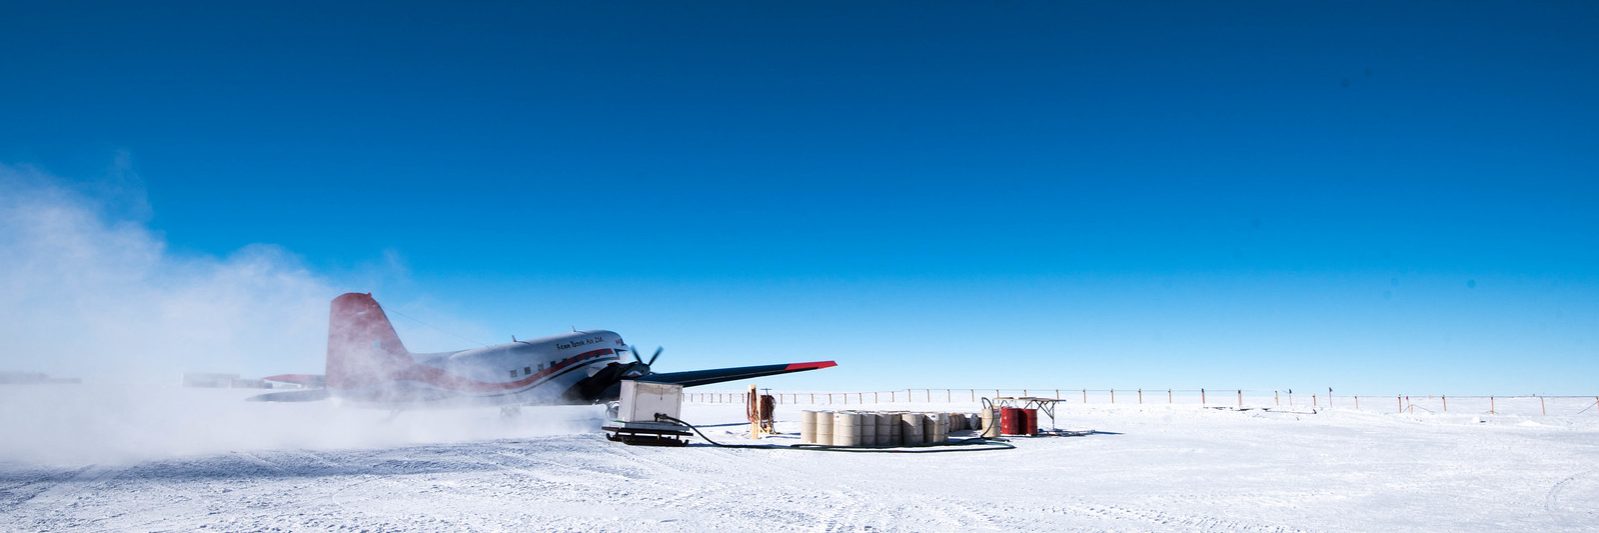 Concordia research base in the Antarctic.